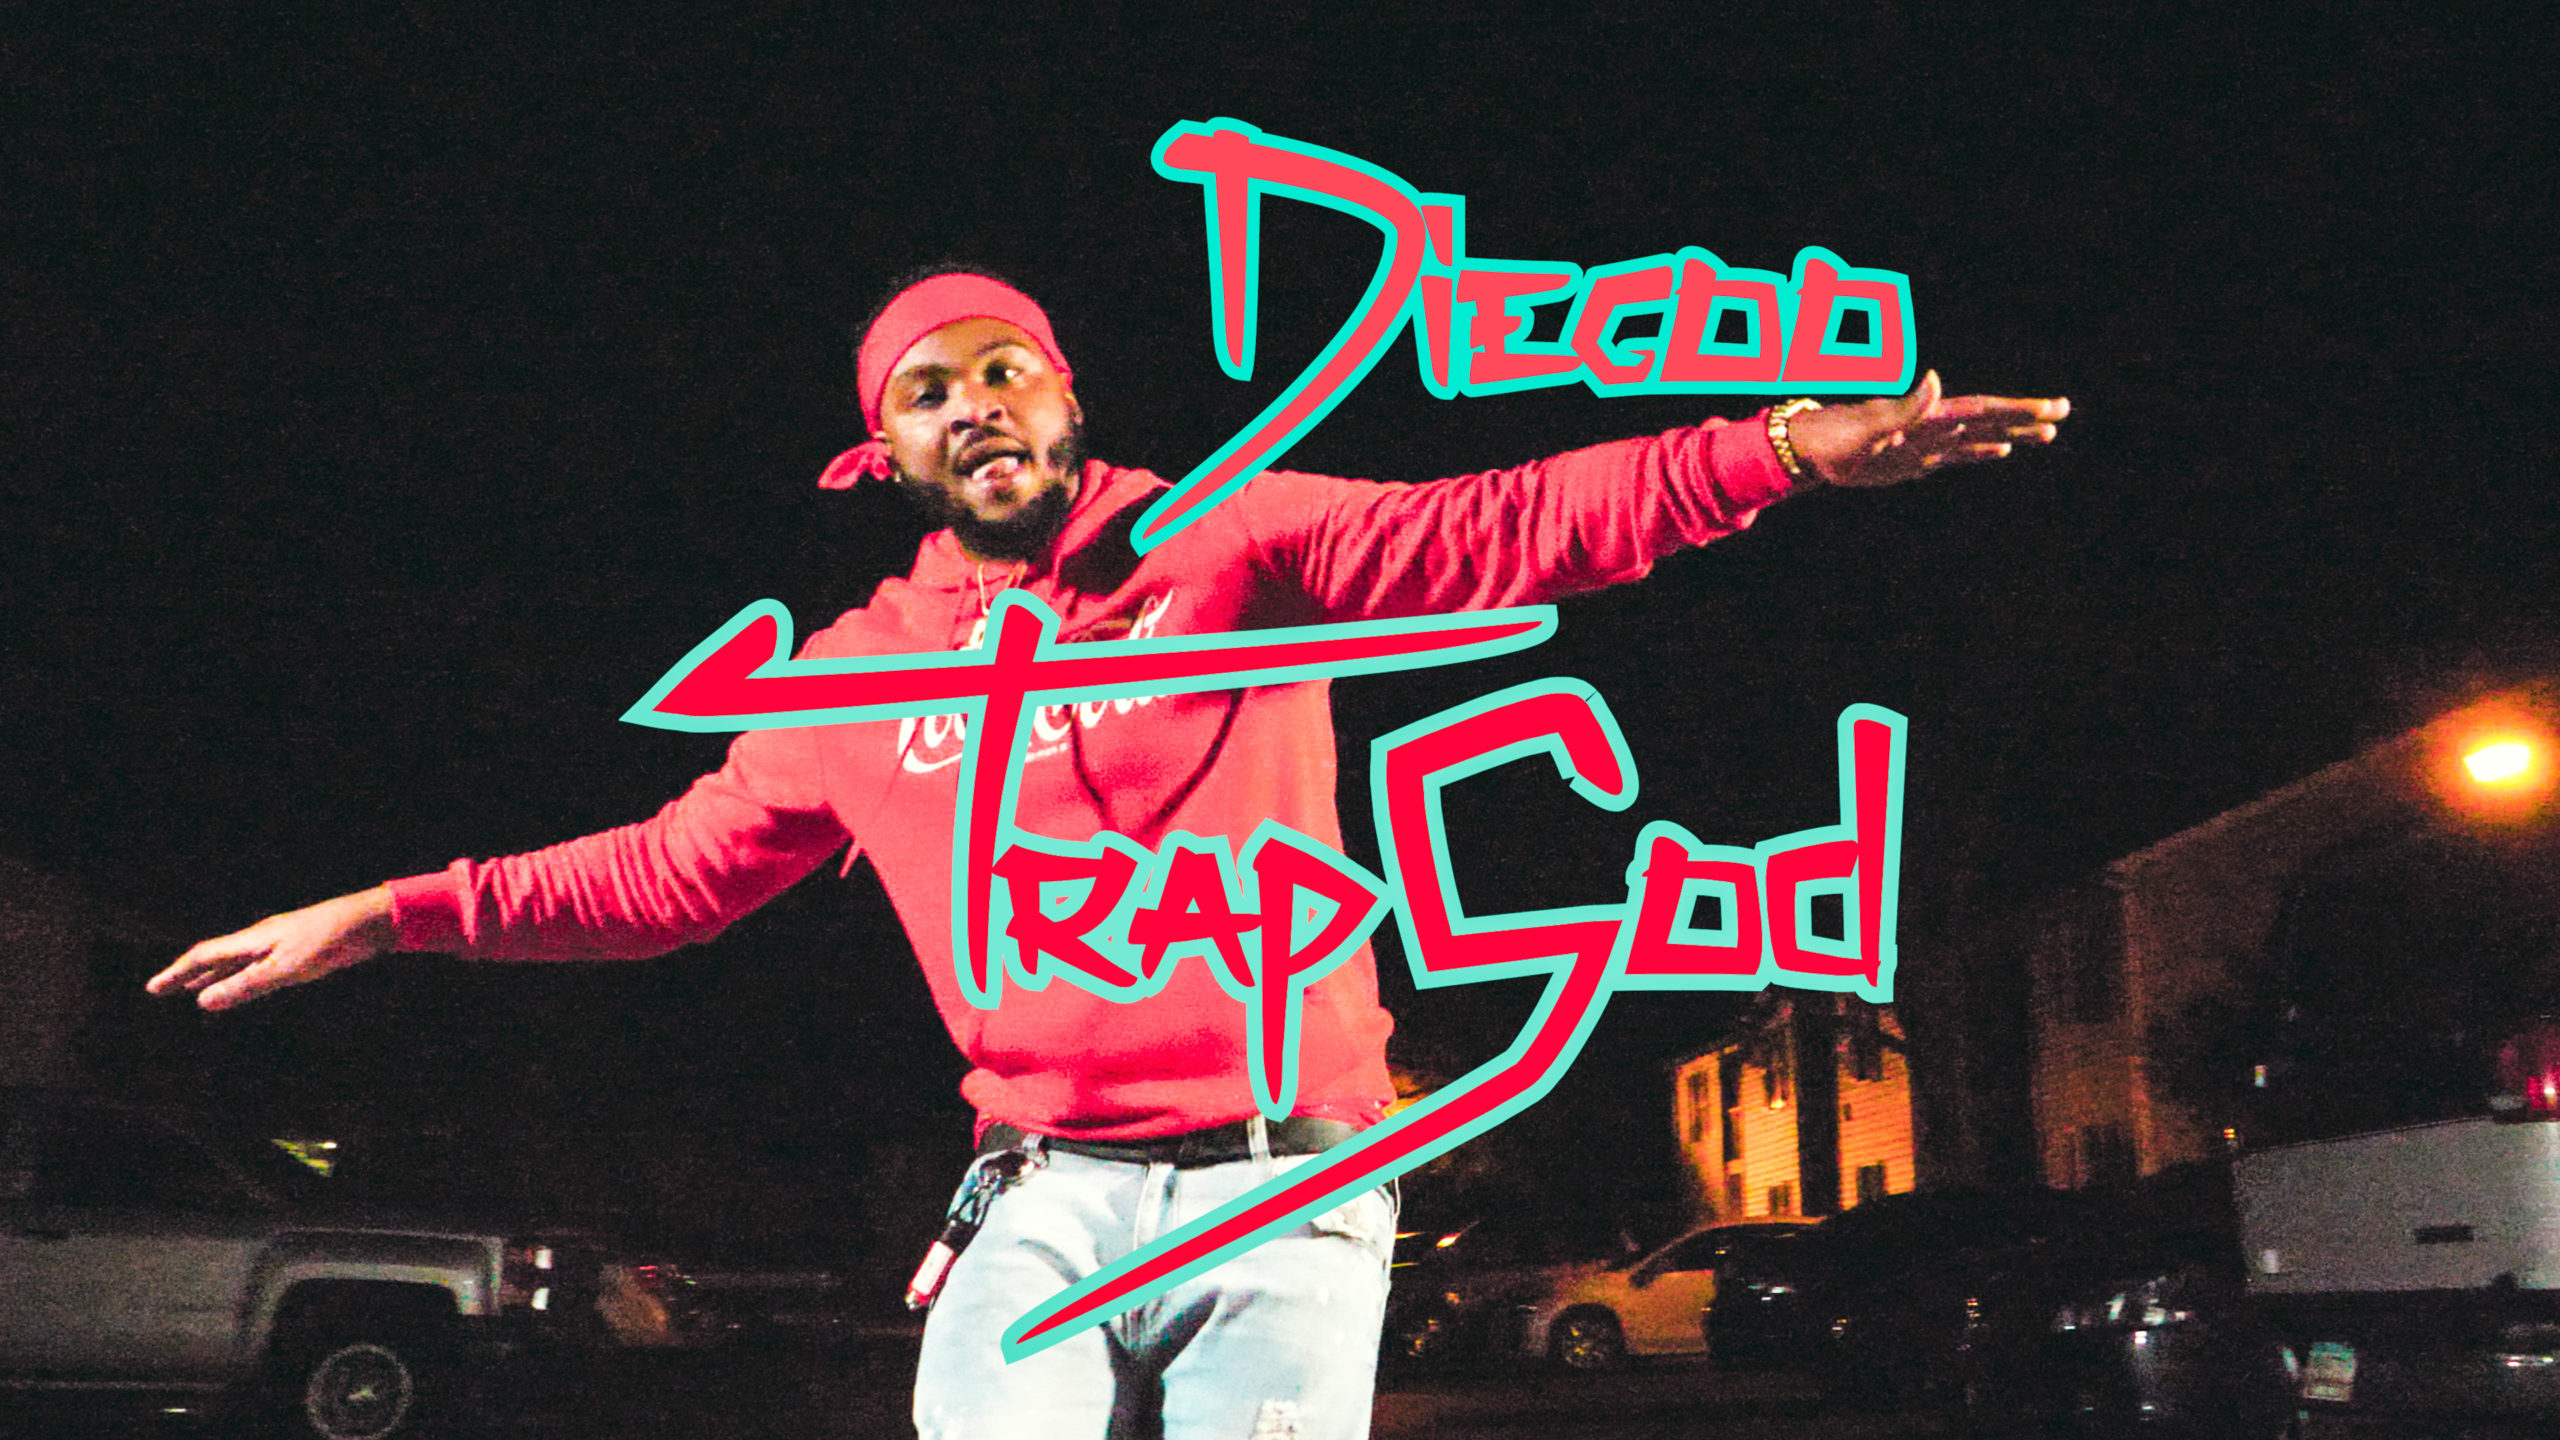 Diegoo Bosses up in the streets with new single “TrapGod” @Diegoo_bossup